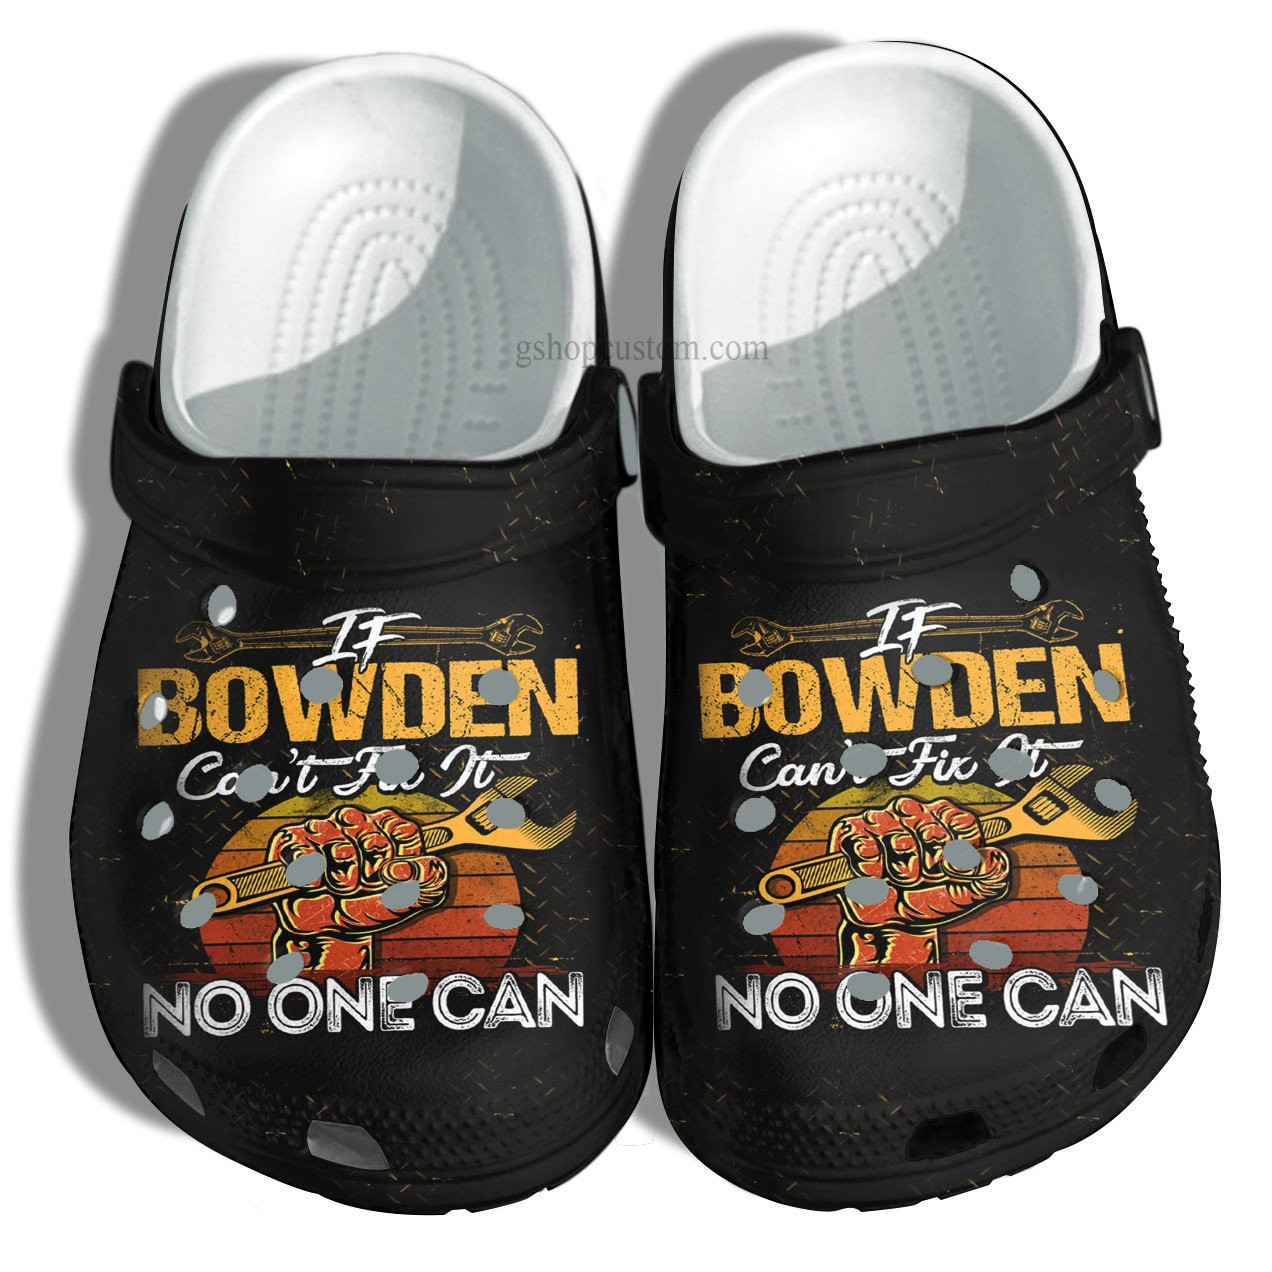 Bowden Cant Fix It No One Can Croc Shoes Father Day Gift- Men Can Fix Anything Vintage Retro Crocs Shoes Gift Grandpa